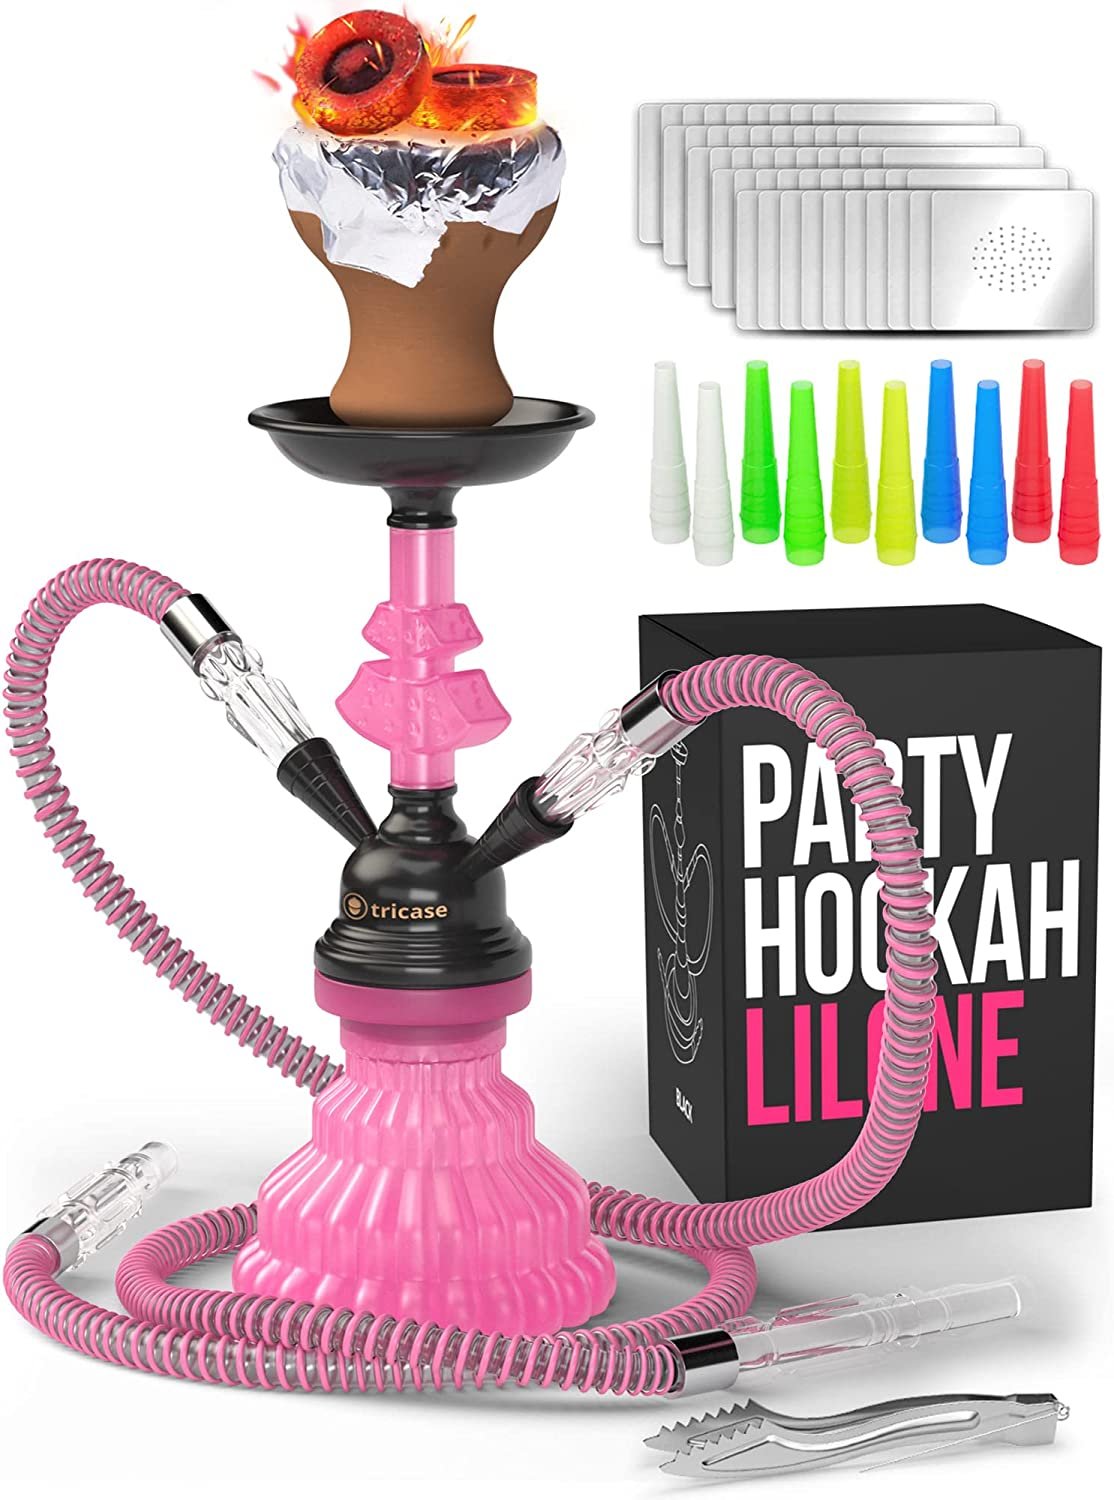 Tricase Pink Hookah Set - LilOne 12” Mini 2-Hose Kit with Foil Bowl & Mouthpiece, Free Shipping